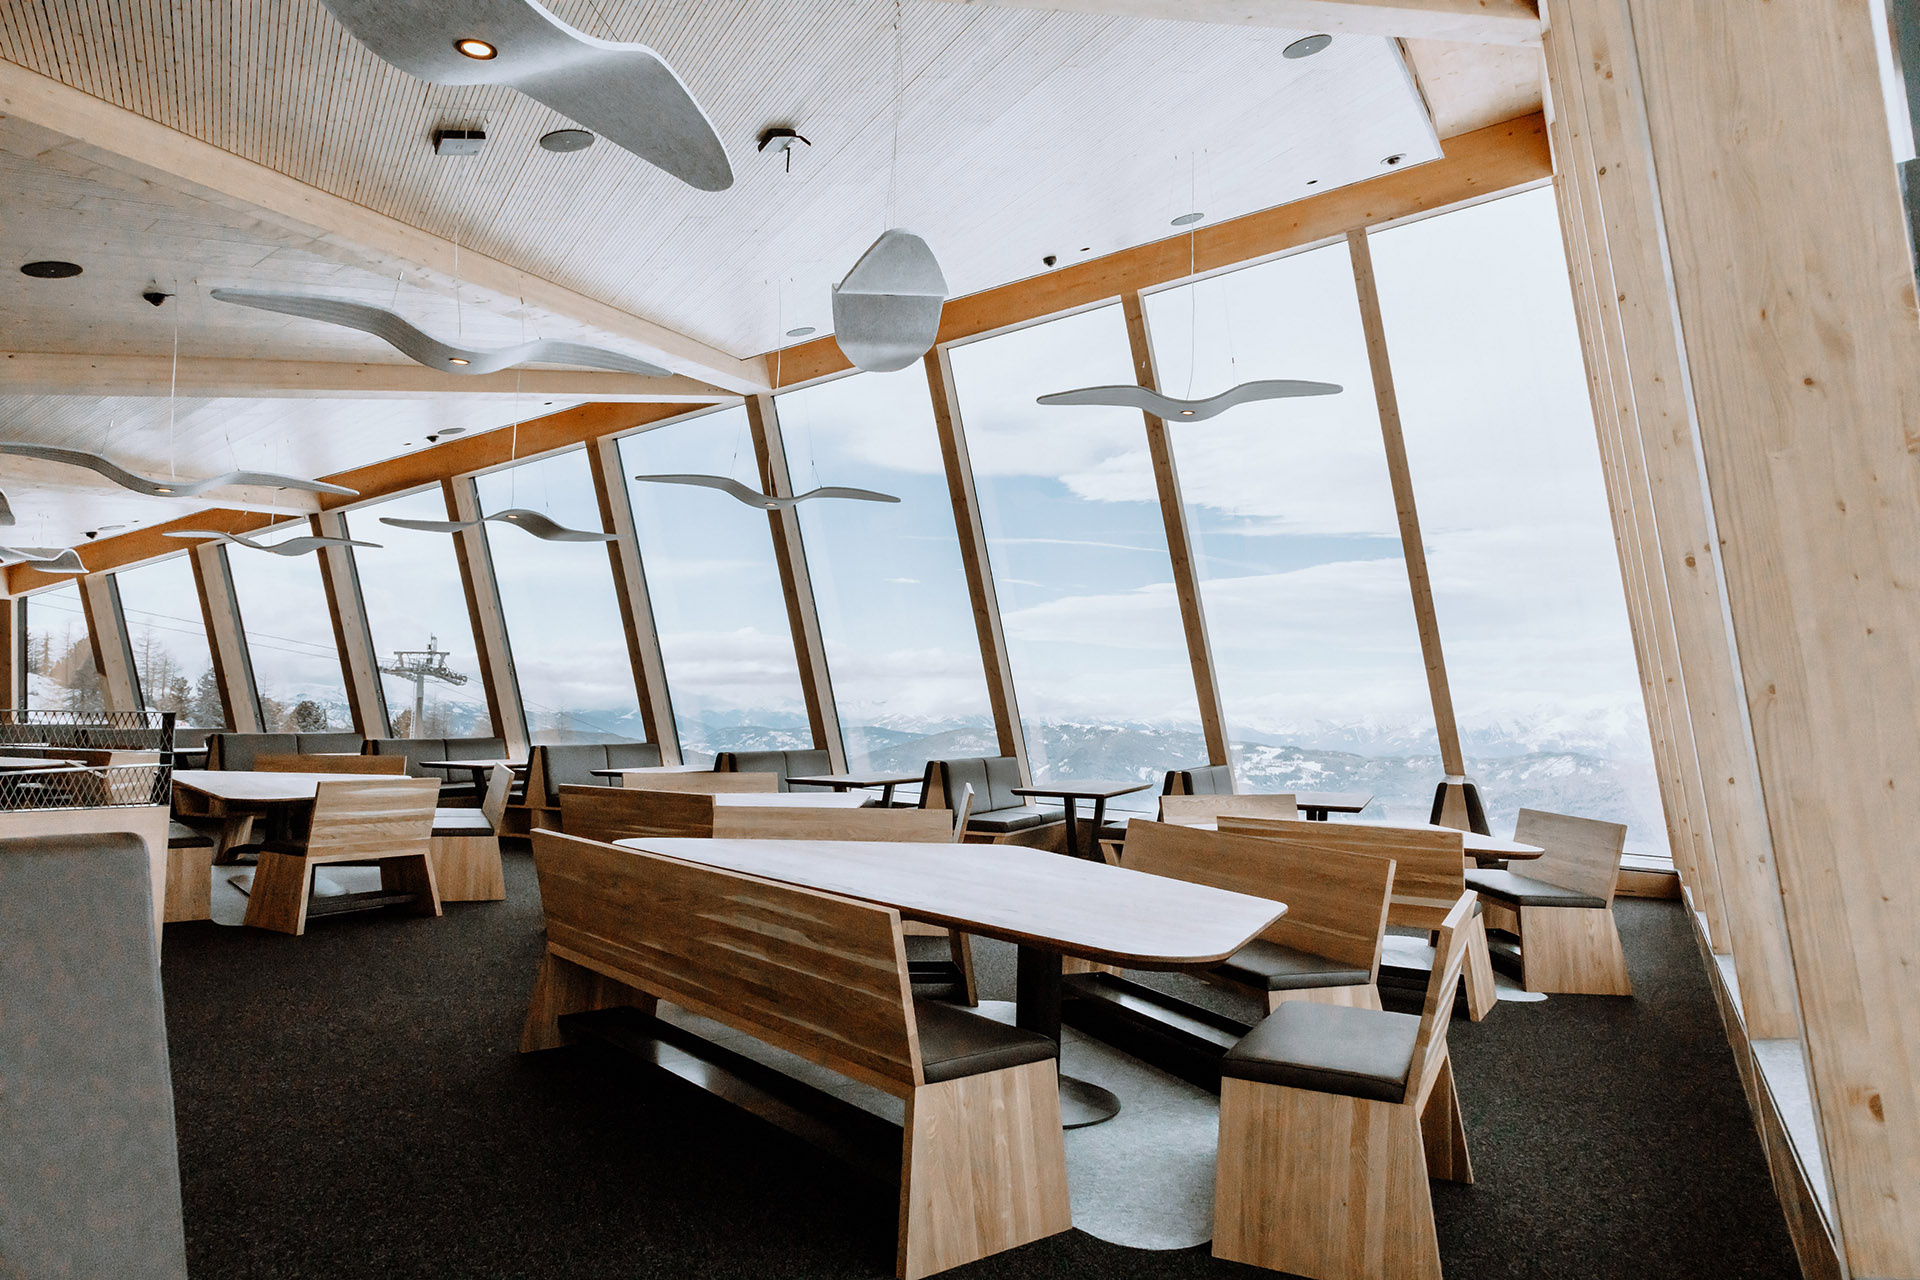 Restaurant perched on the Austrian Alps. Breathtaking scenery and 360-degree panoramic views